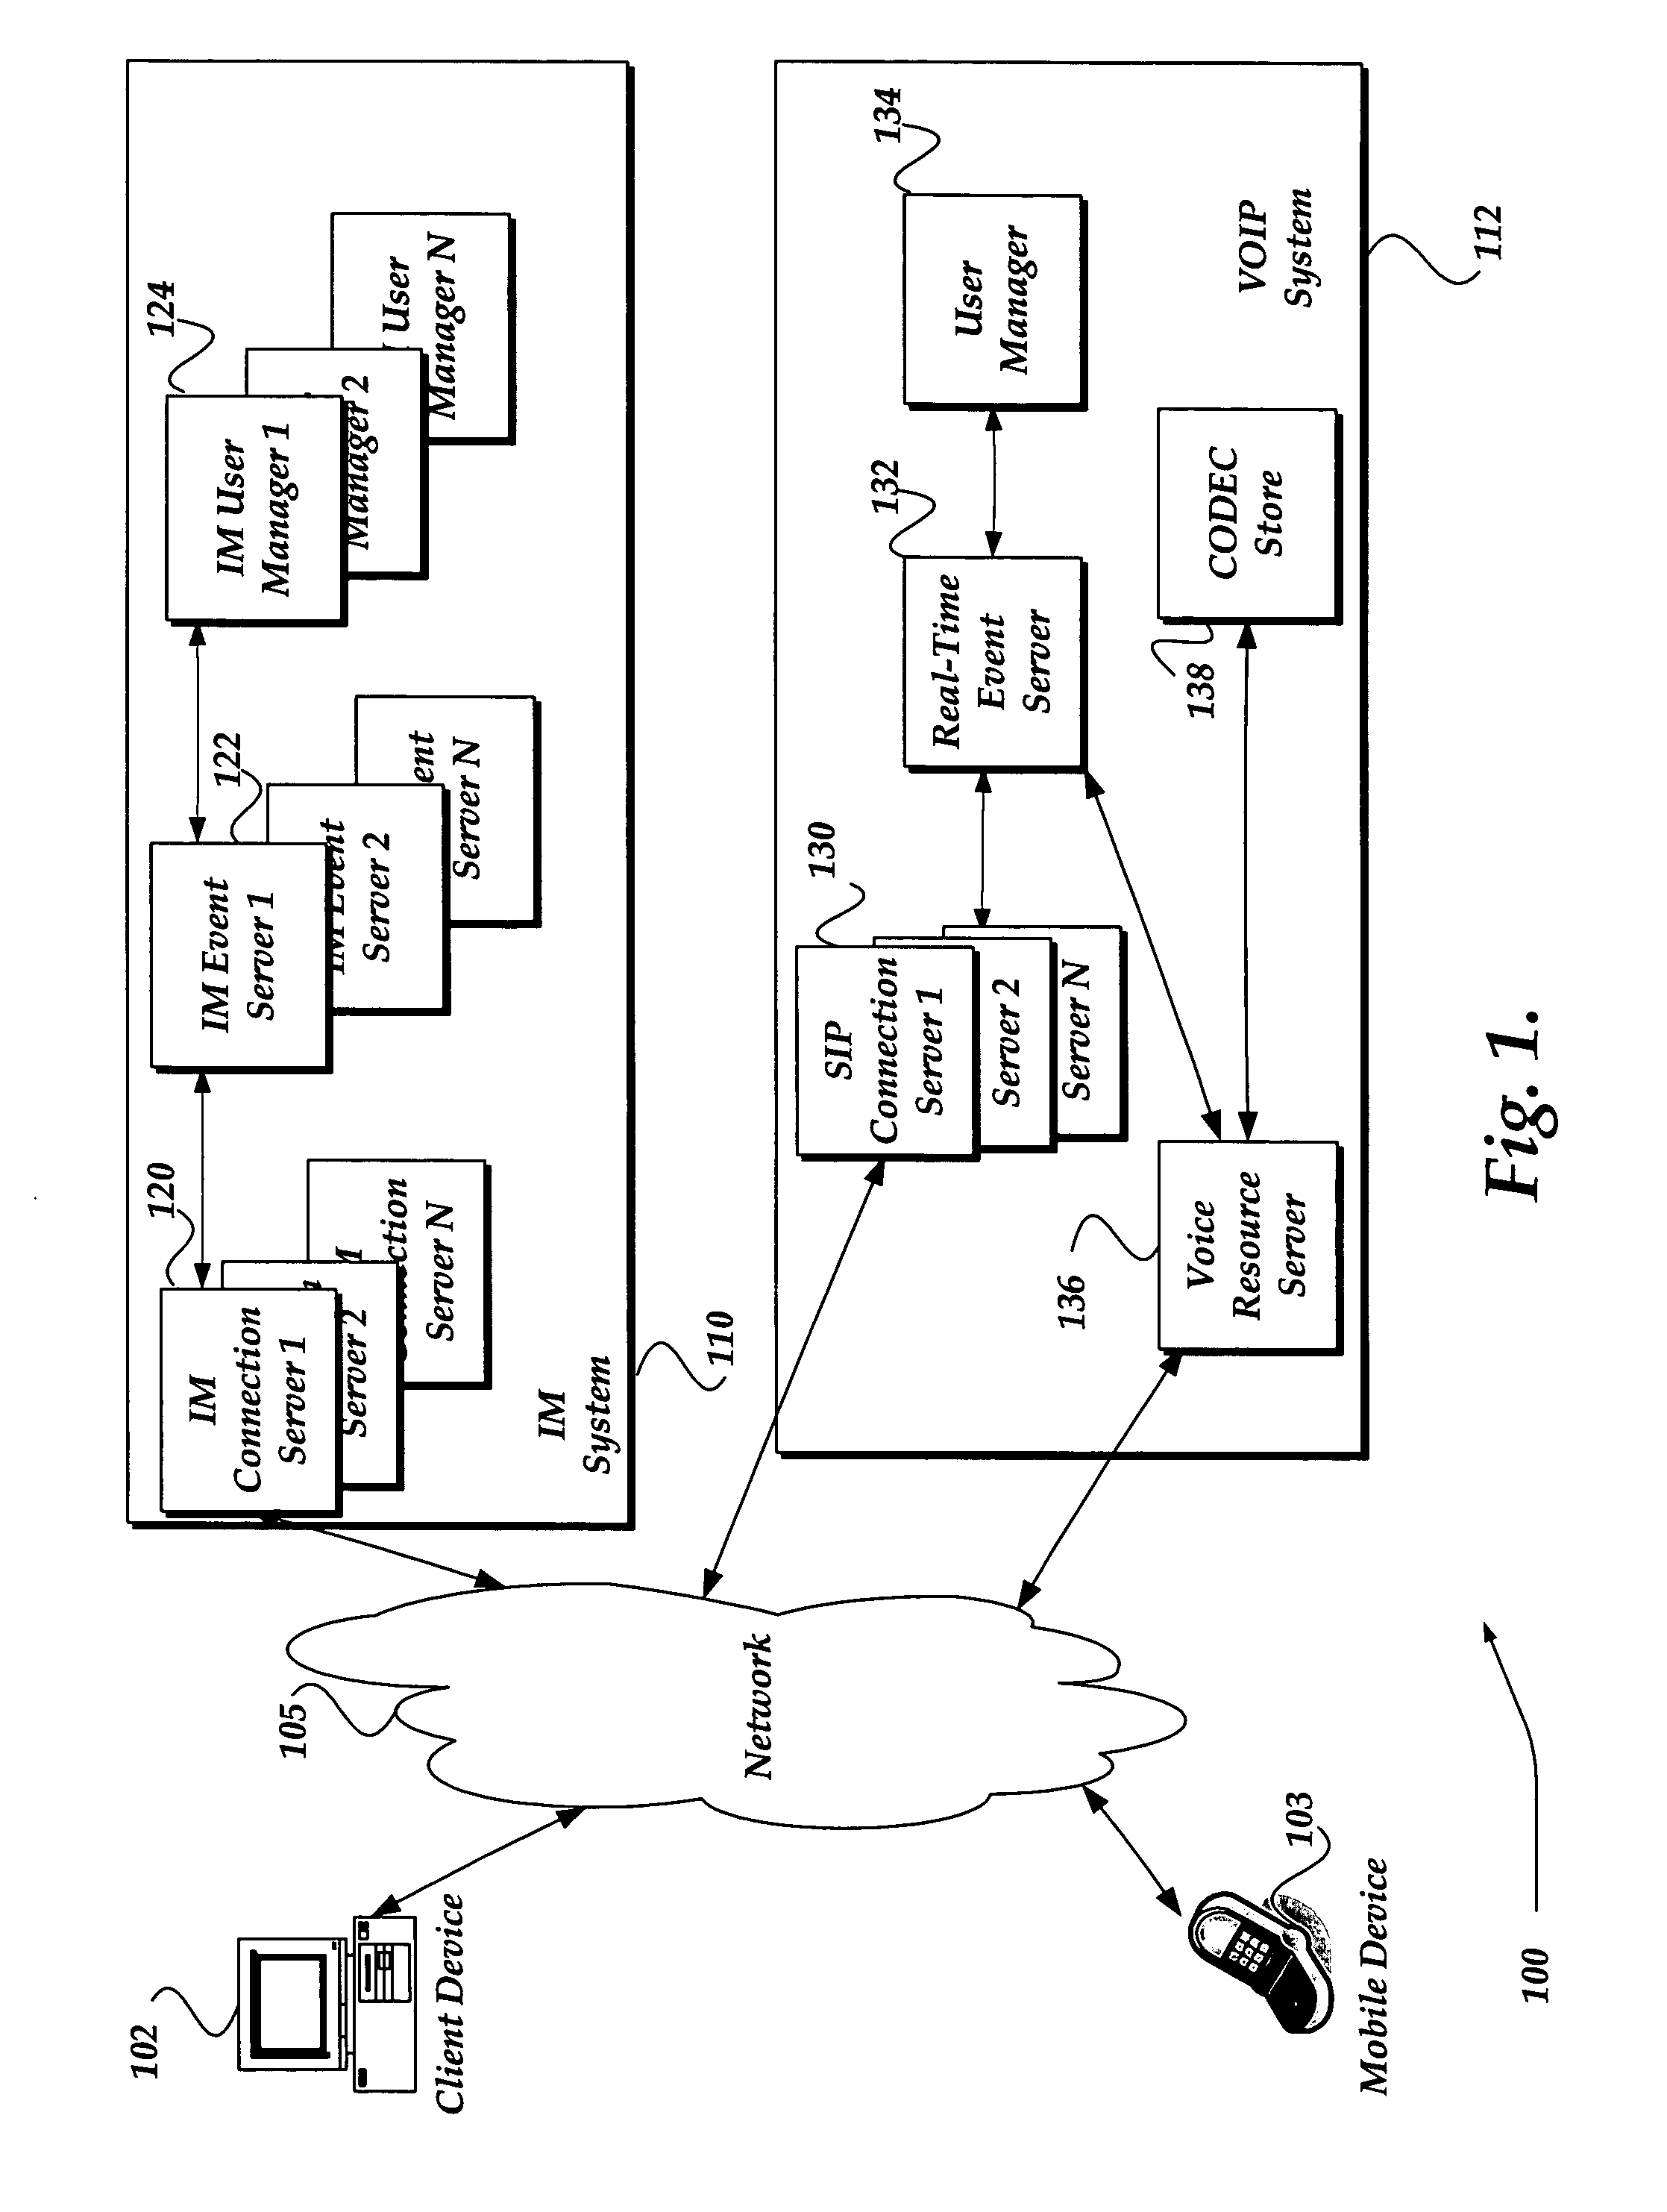 Dynamically selecting CODECS for managing an audio message